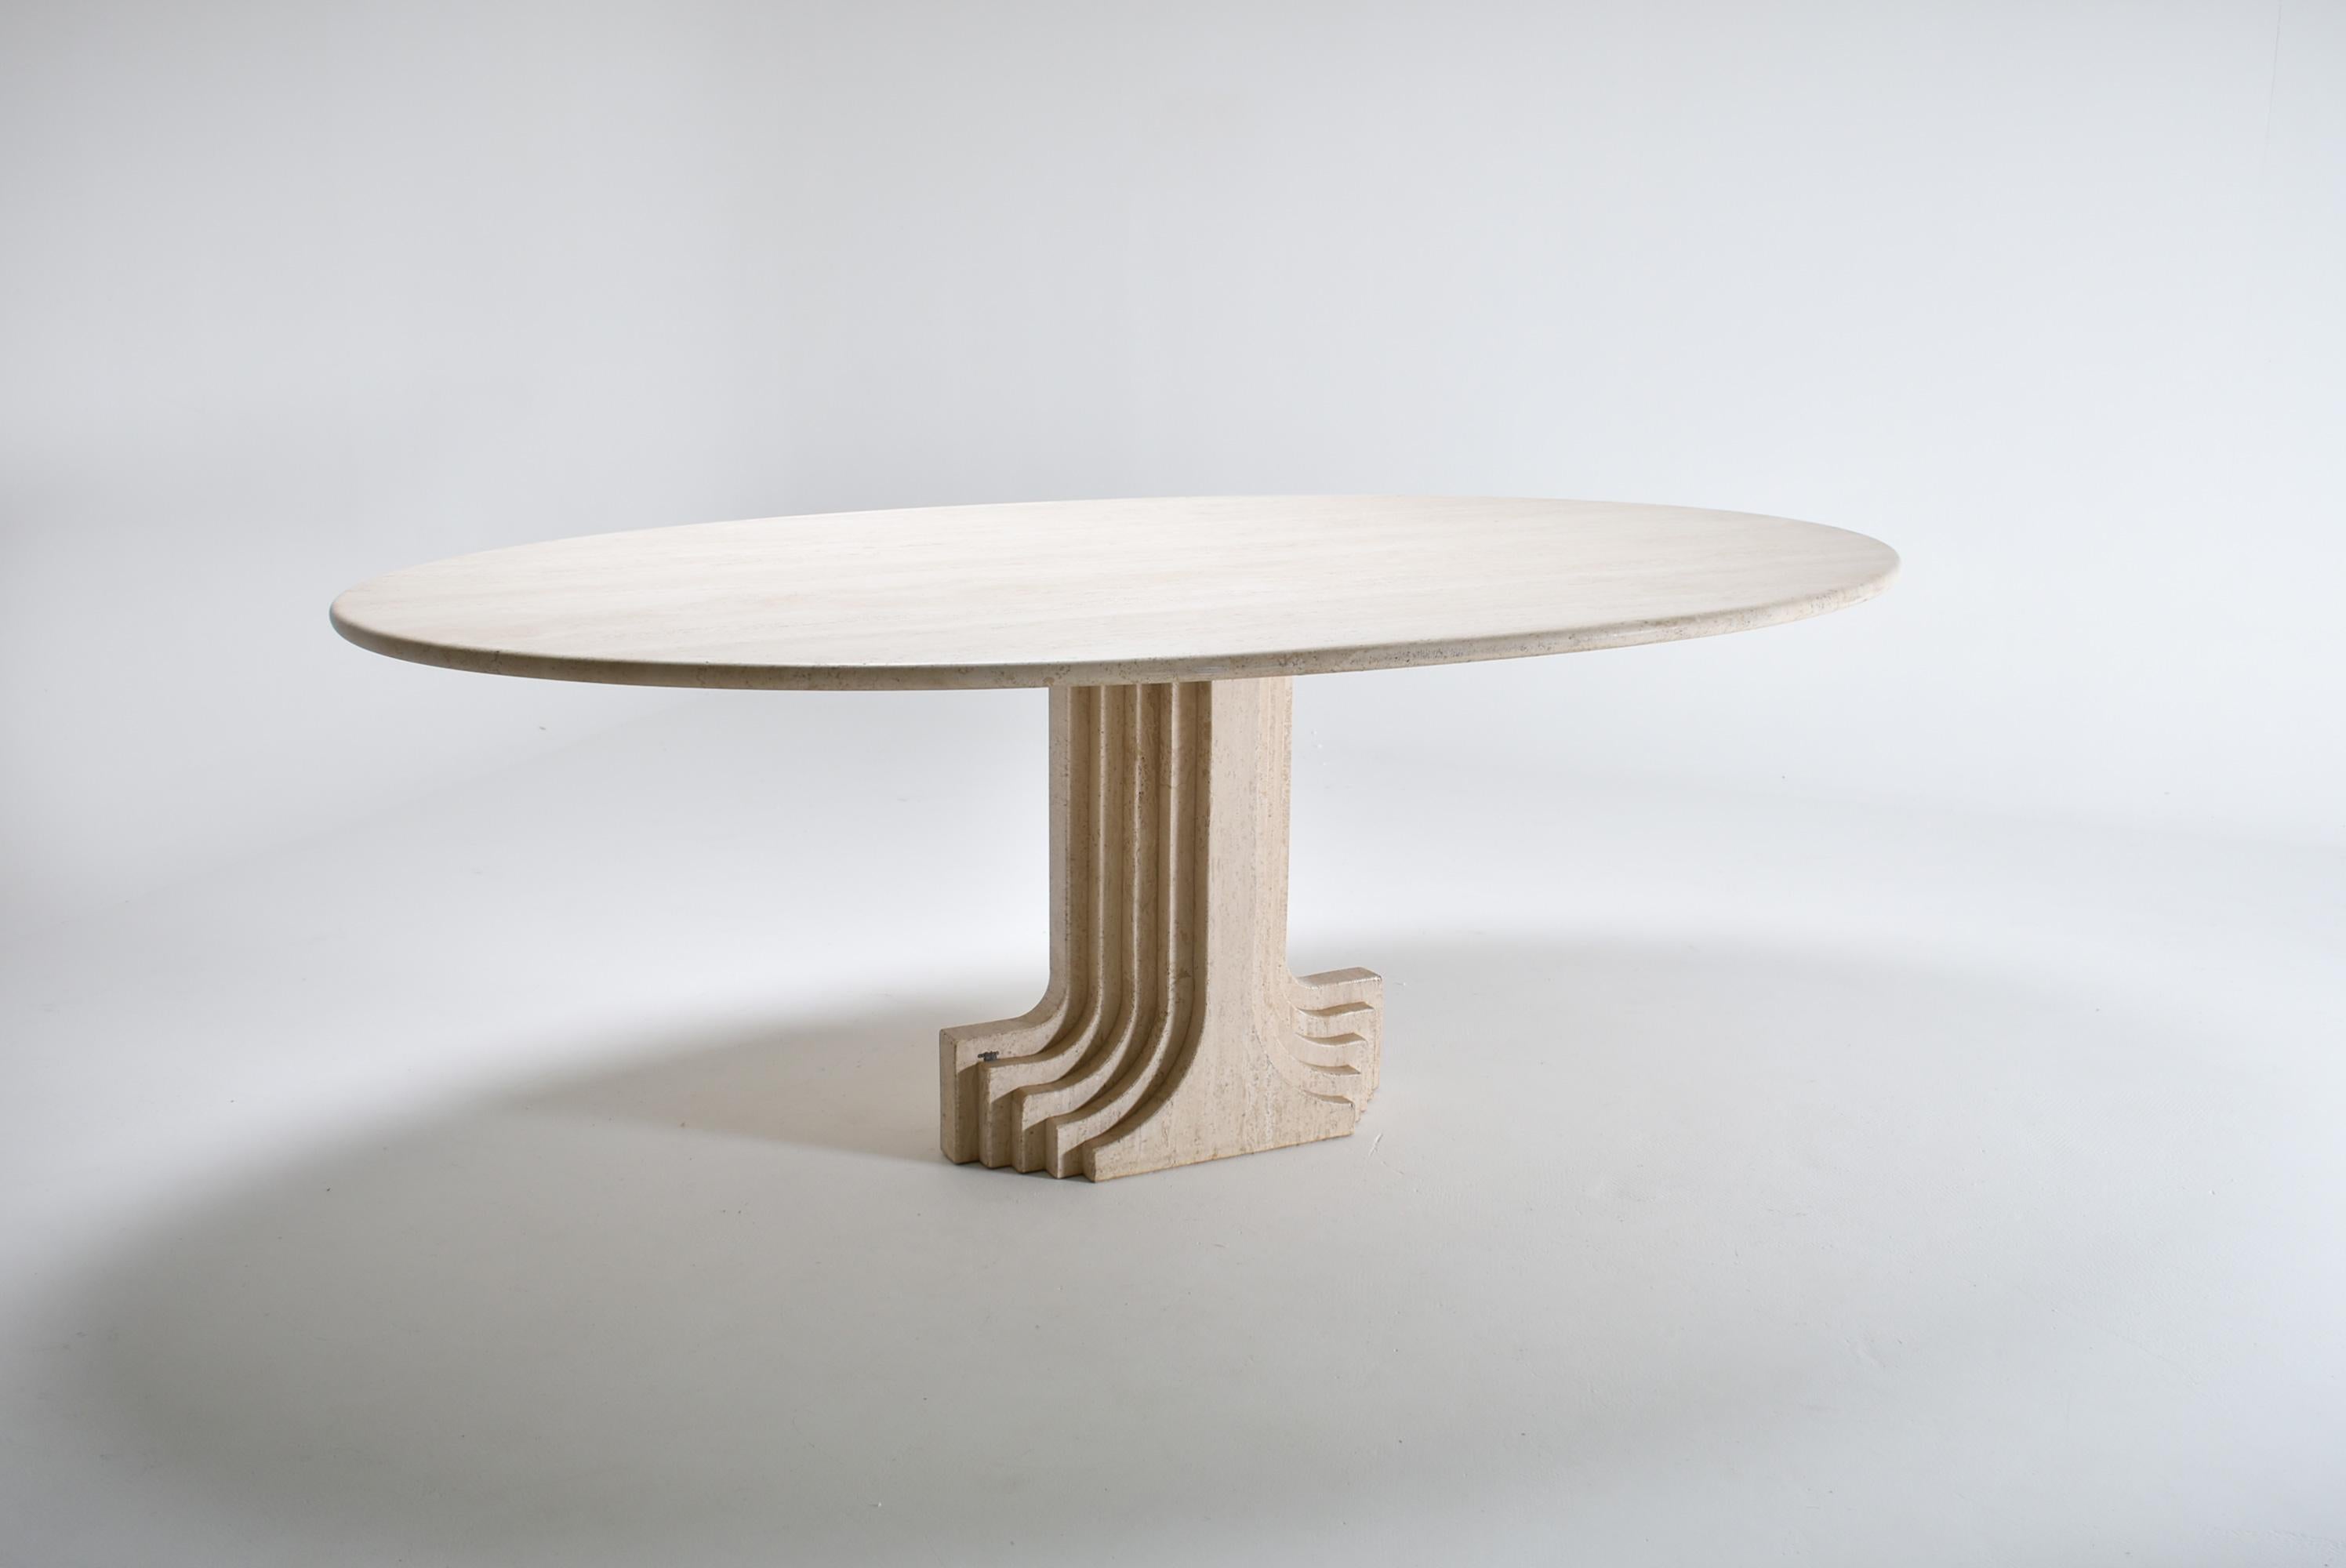 Mid-Century Modern oval travertine dining room table, model Argo.
Designed in 1970 by Carlo Scarpa (1906-1978) for the 